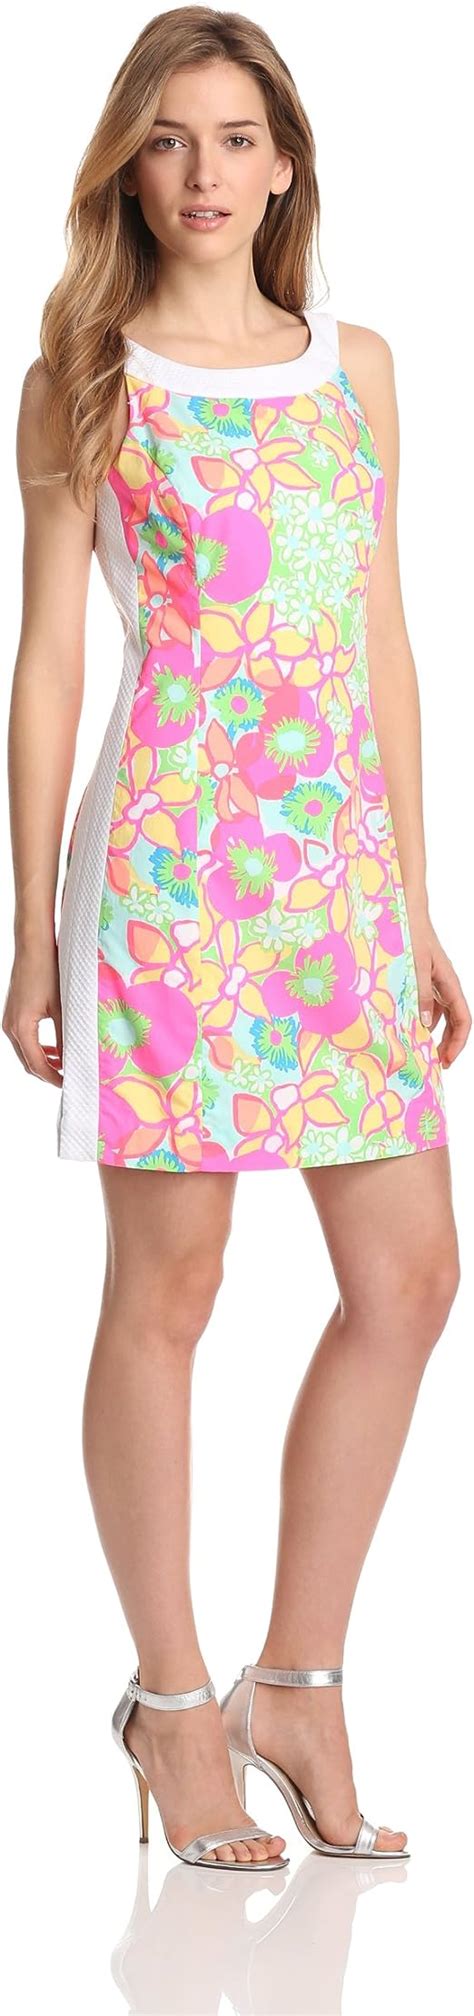 lilly pulitzer women s darcy dress multi ice cream social 00 at amazon women s clothing store